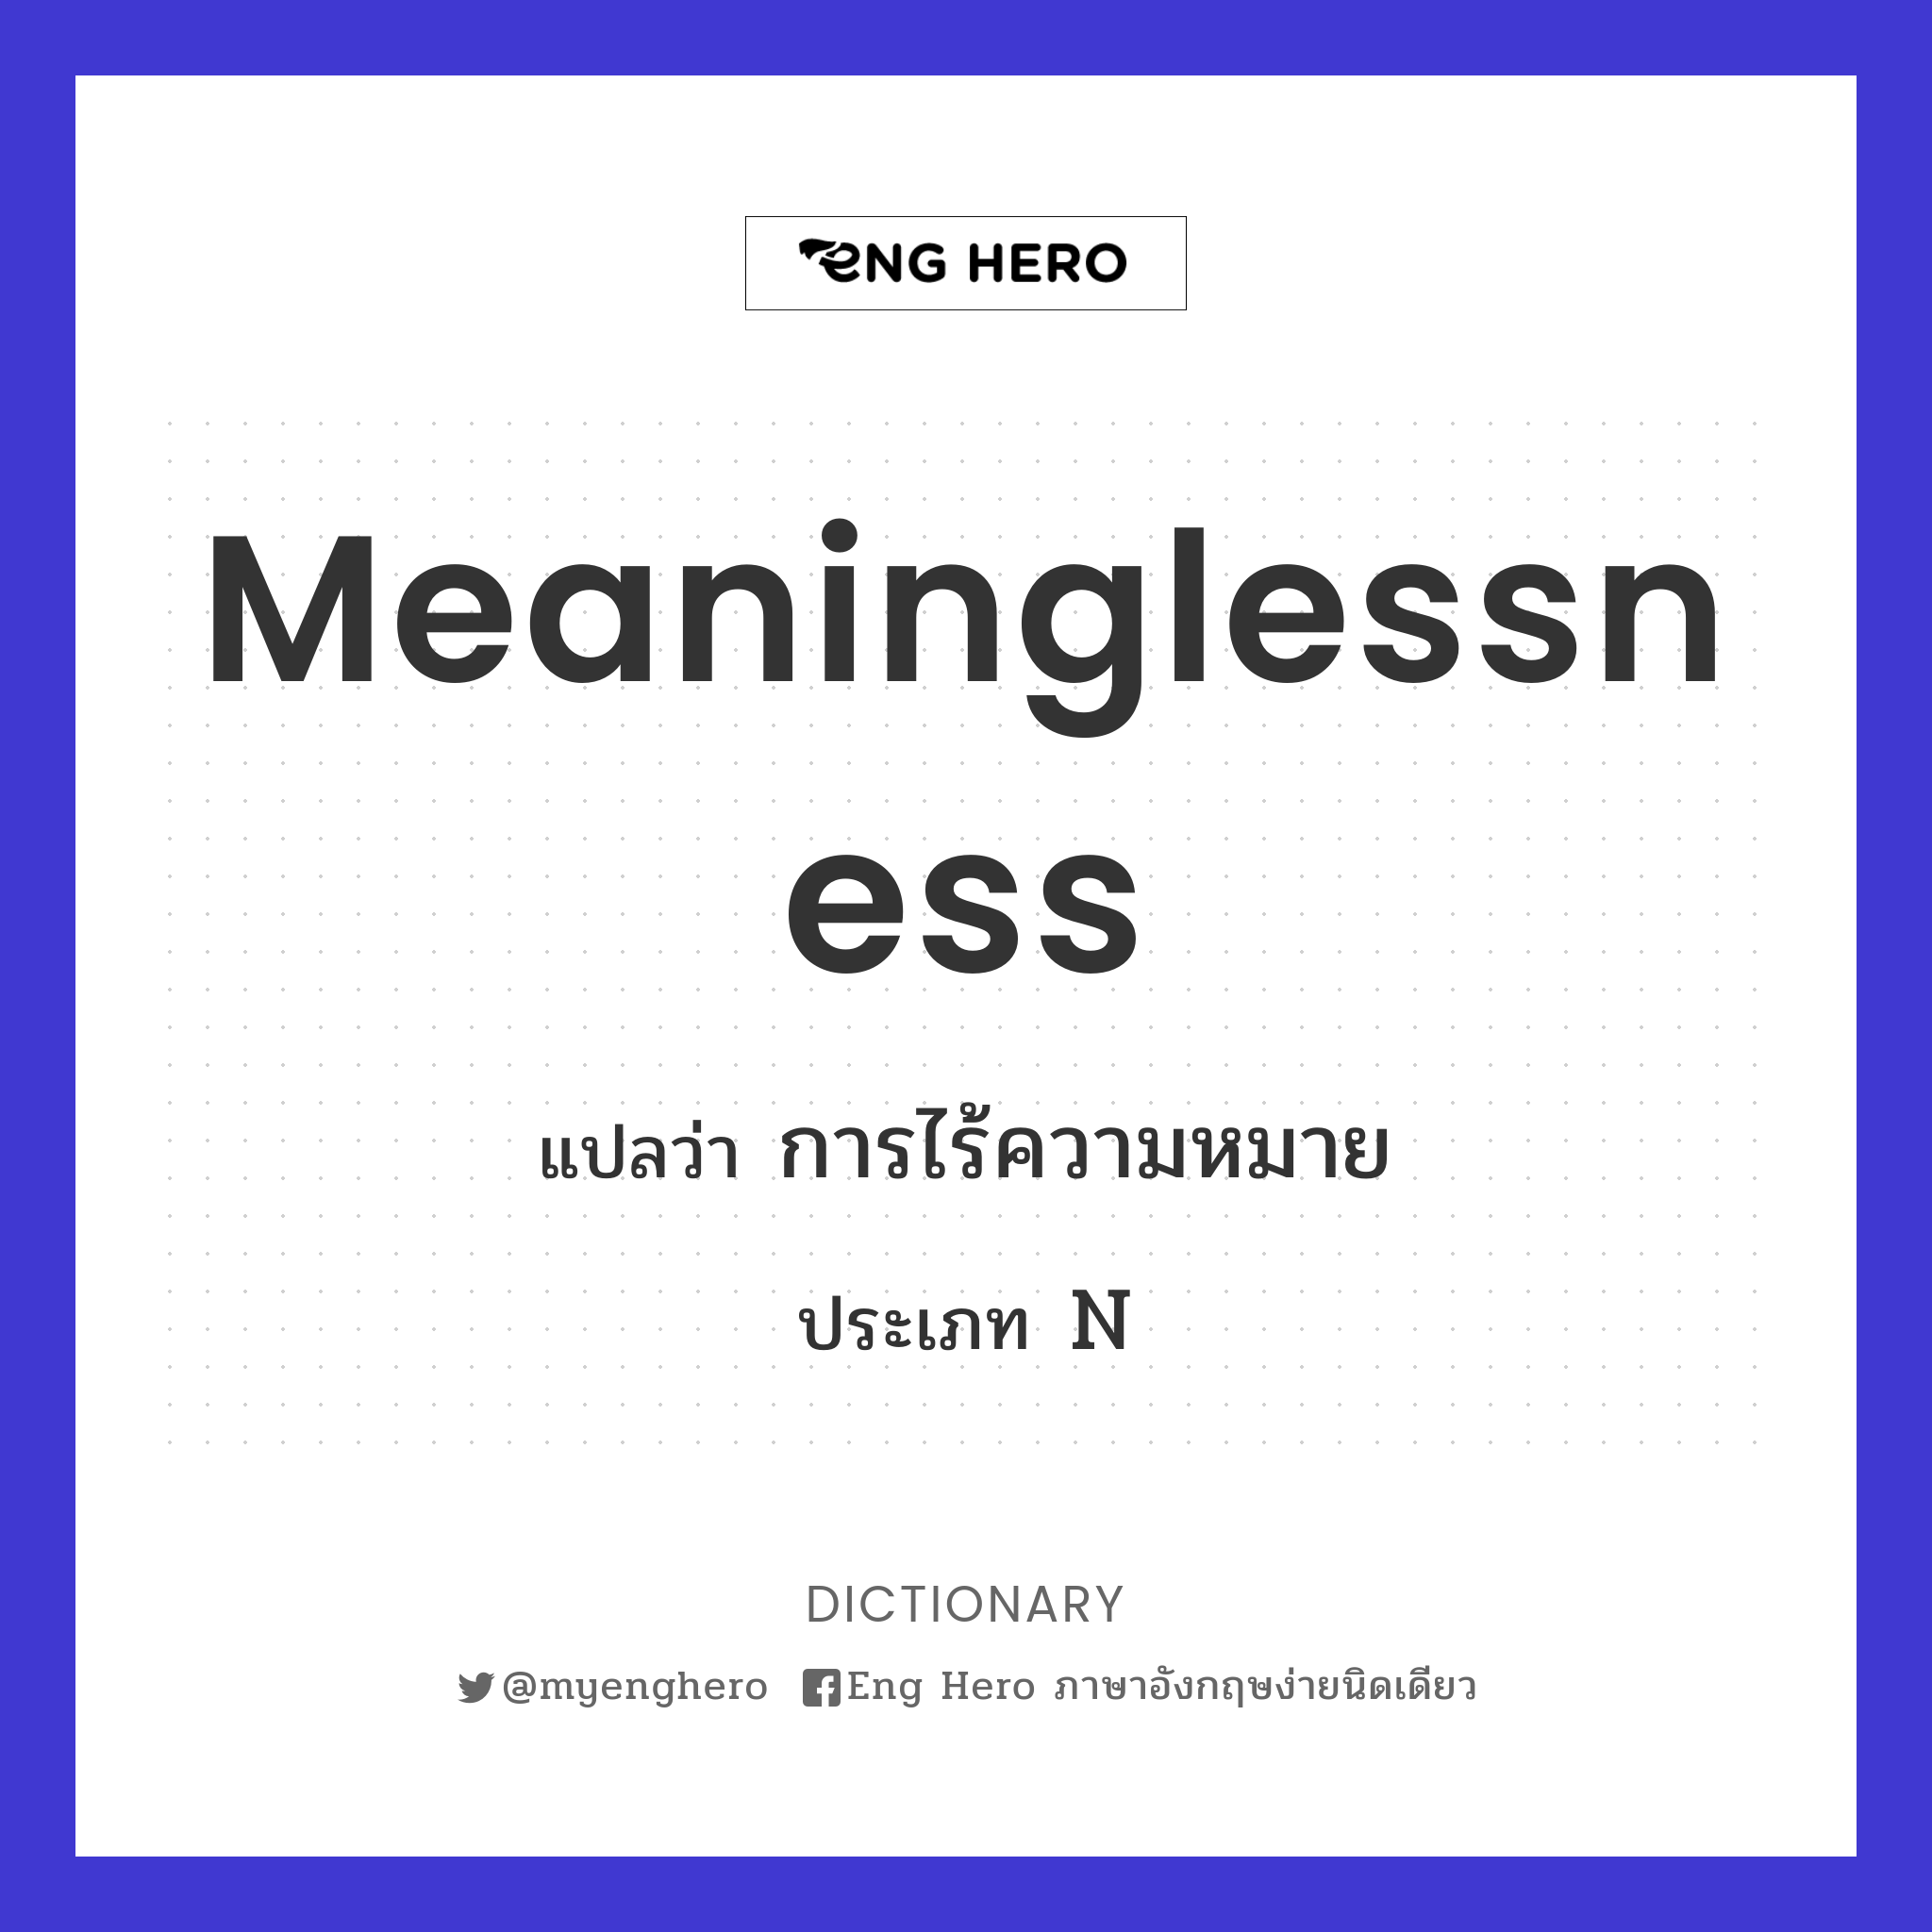 meaninglessness